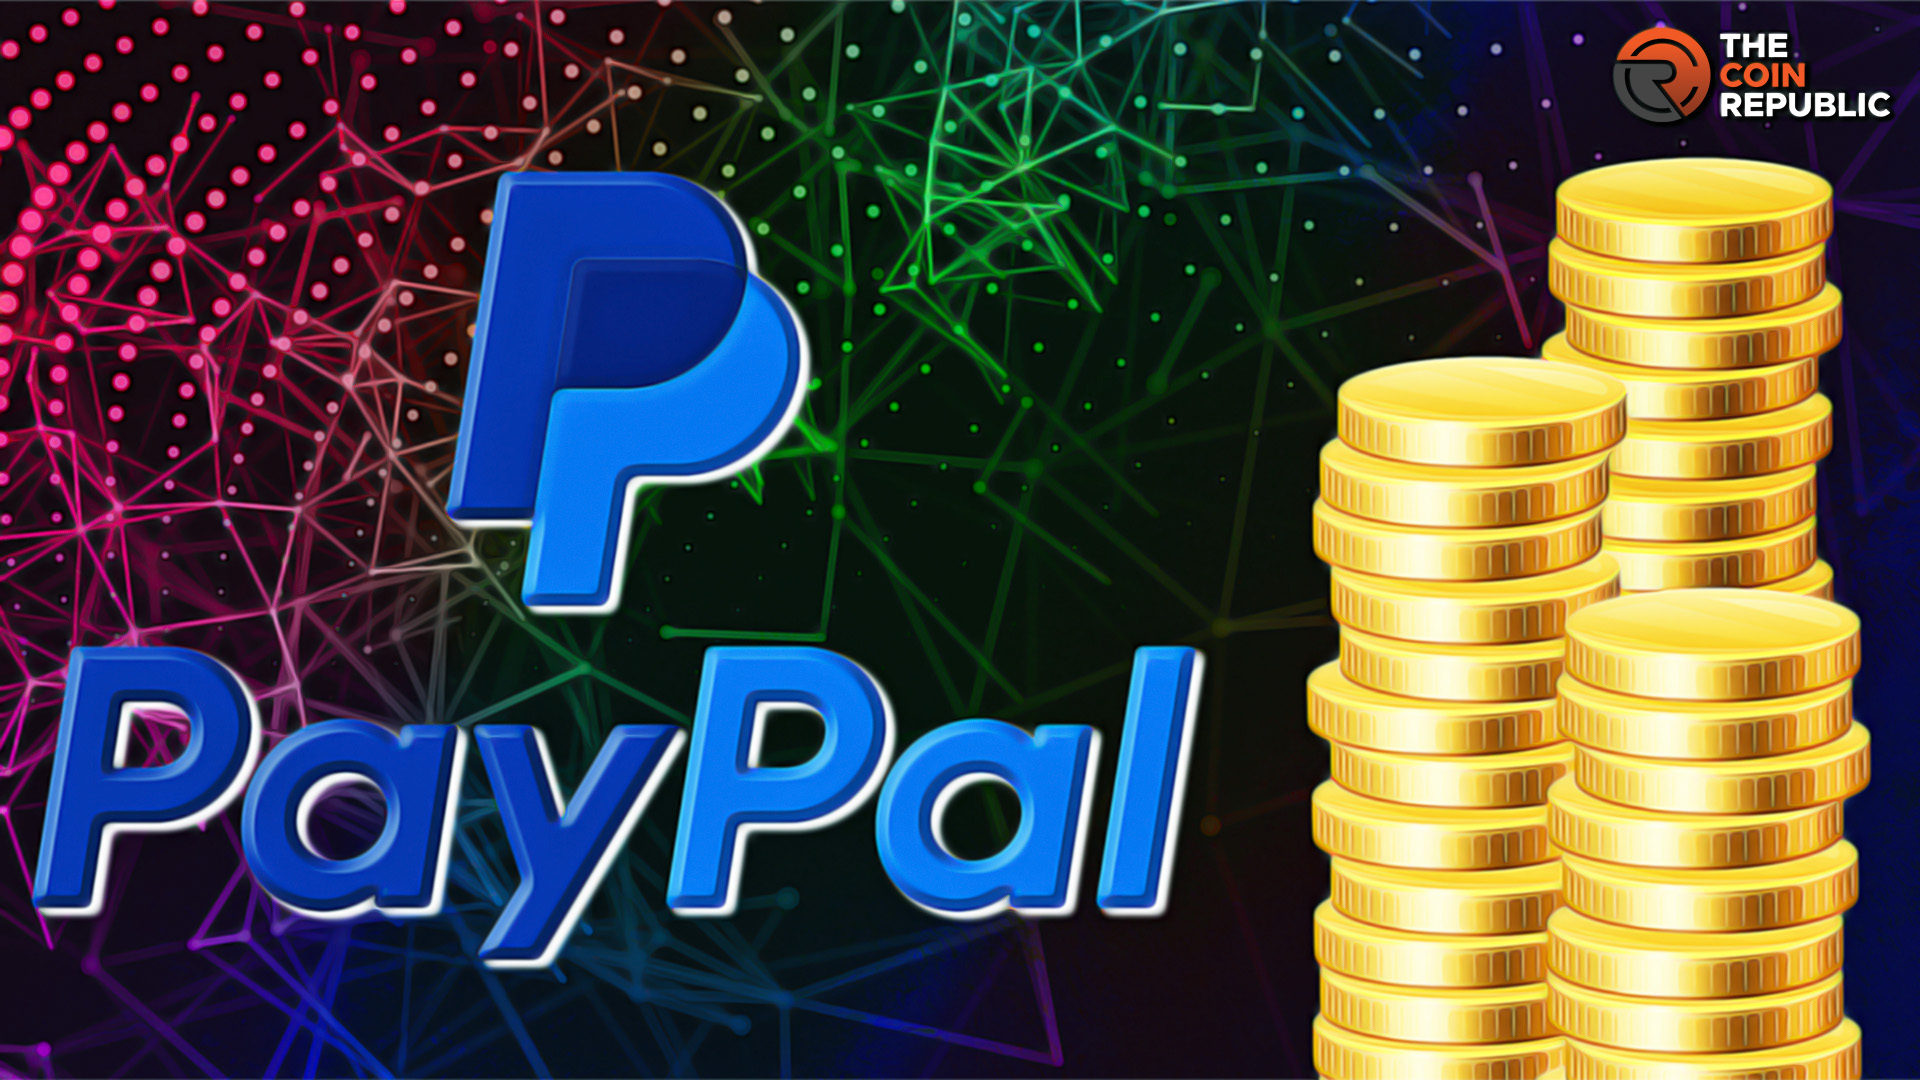 PayPal Aims to Revolutionize Crypto Industry With PYUSD